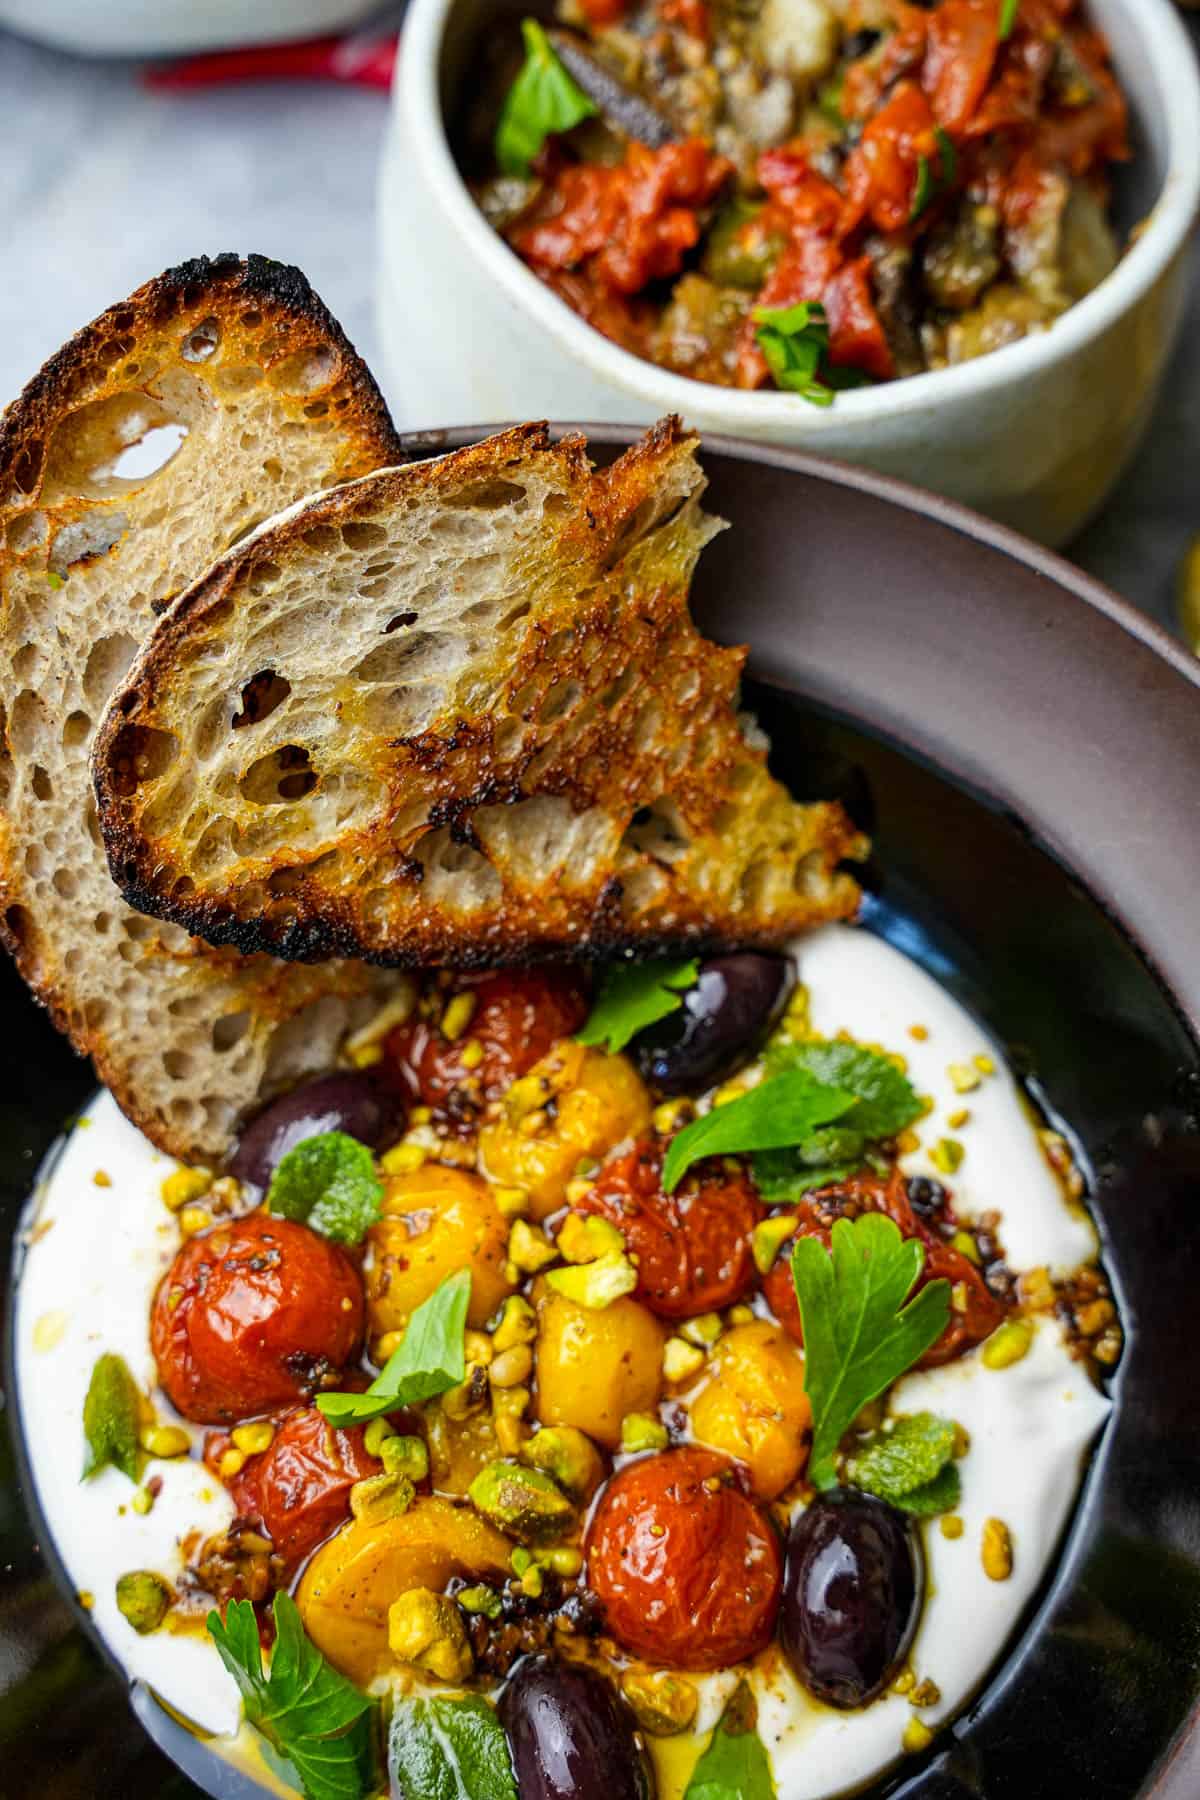 Labneh in a black bowl topped with roasted tomatoes, herbs and pistachios. Grilled bread, and Turkish shakshuka on the side.